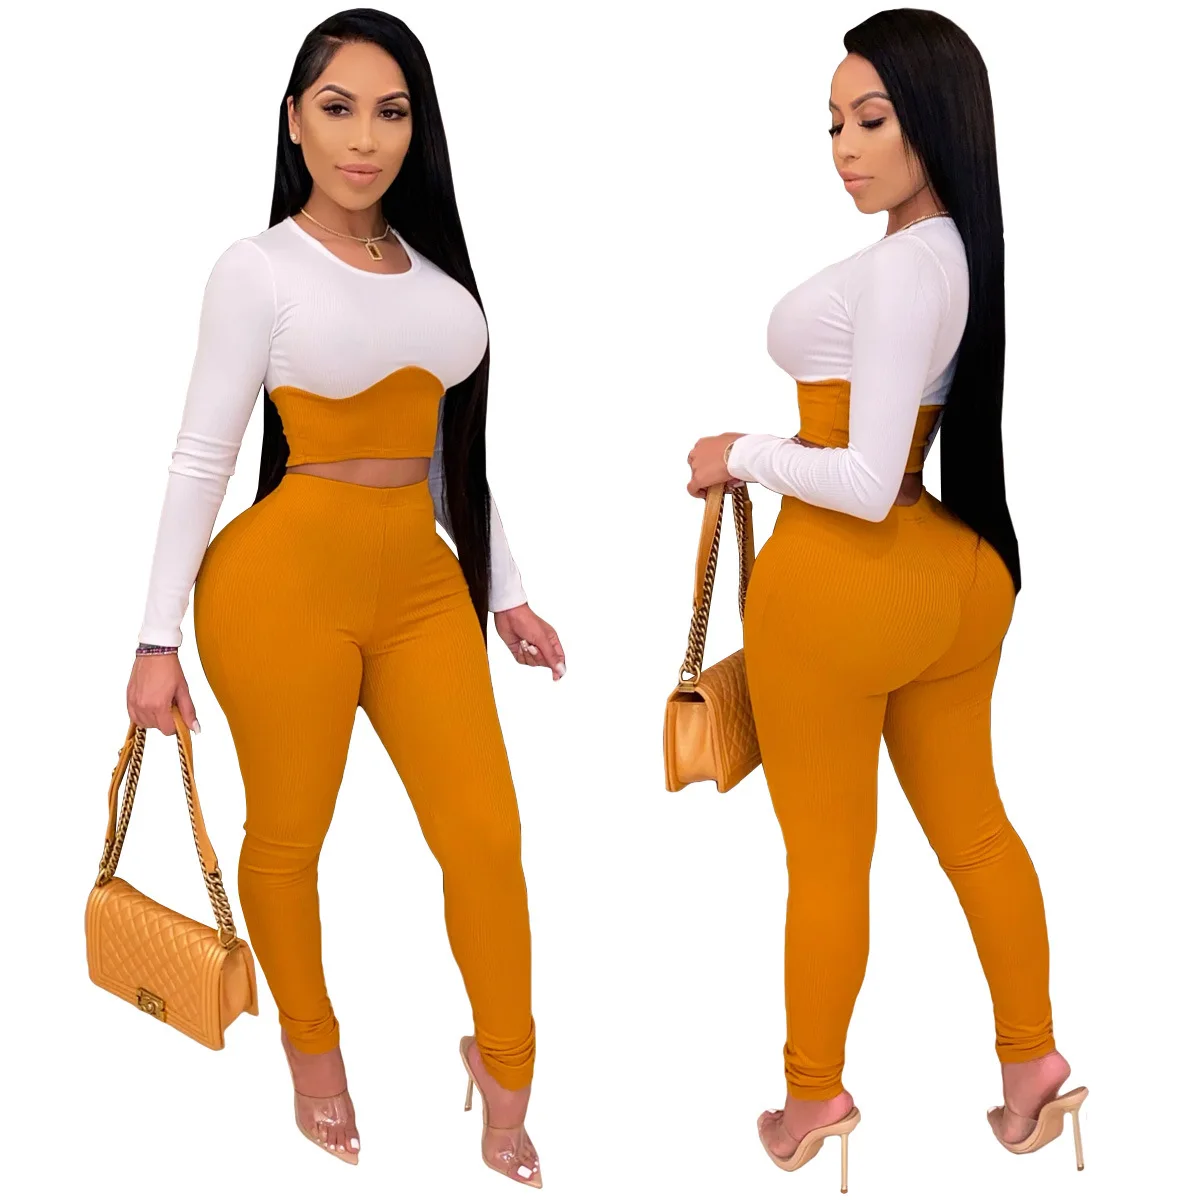 

Active Patchwork Knit Sweatsuit Two 2 Piece Set for Women Winter Fitness Outfit Crop Top + Legging Pants Ribbed Tracksuit